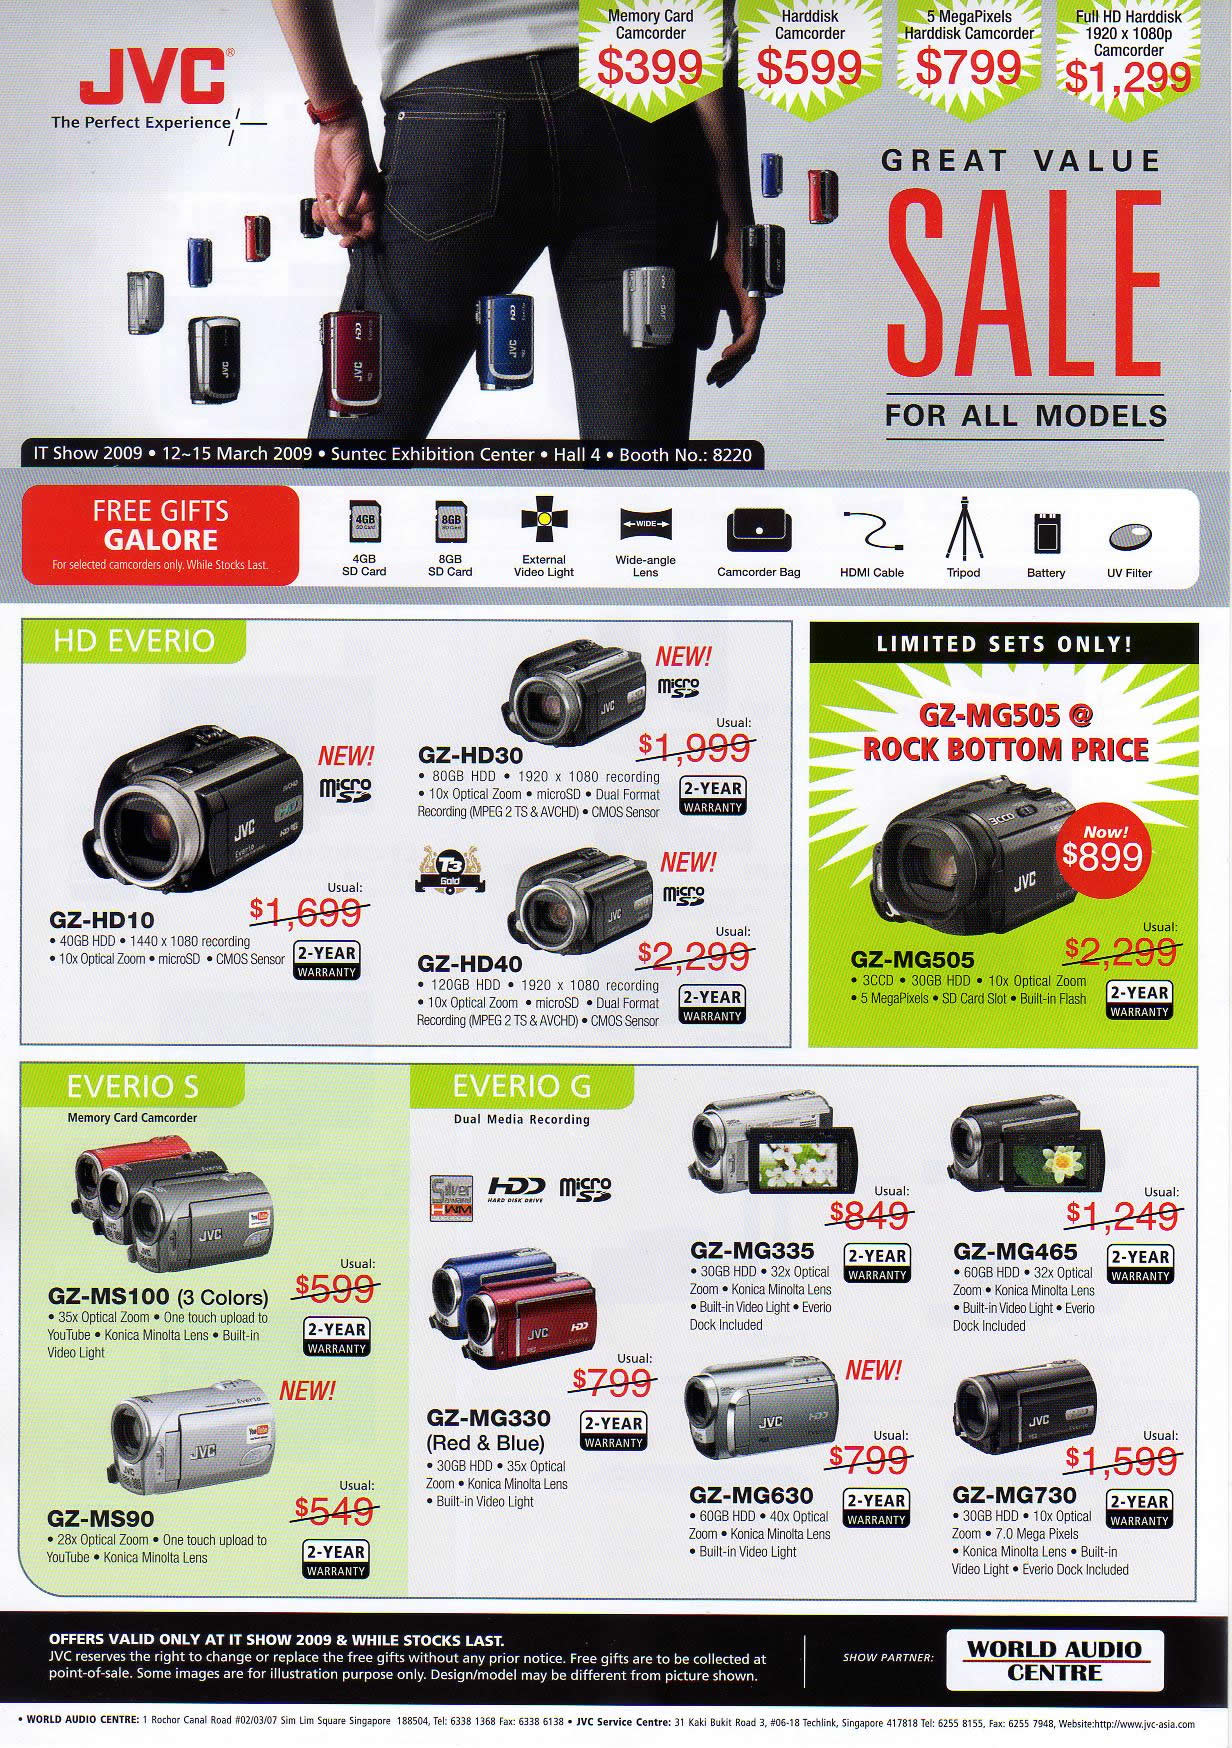 IT Show 2009 price list image brochure of JVC Camcorders (coldfreeze)